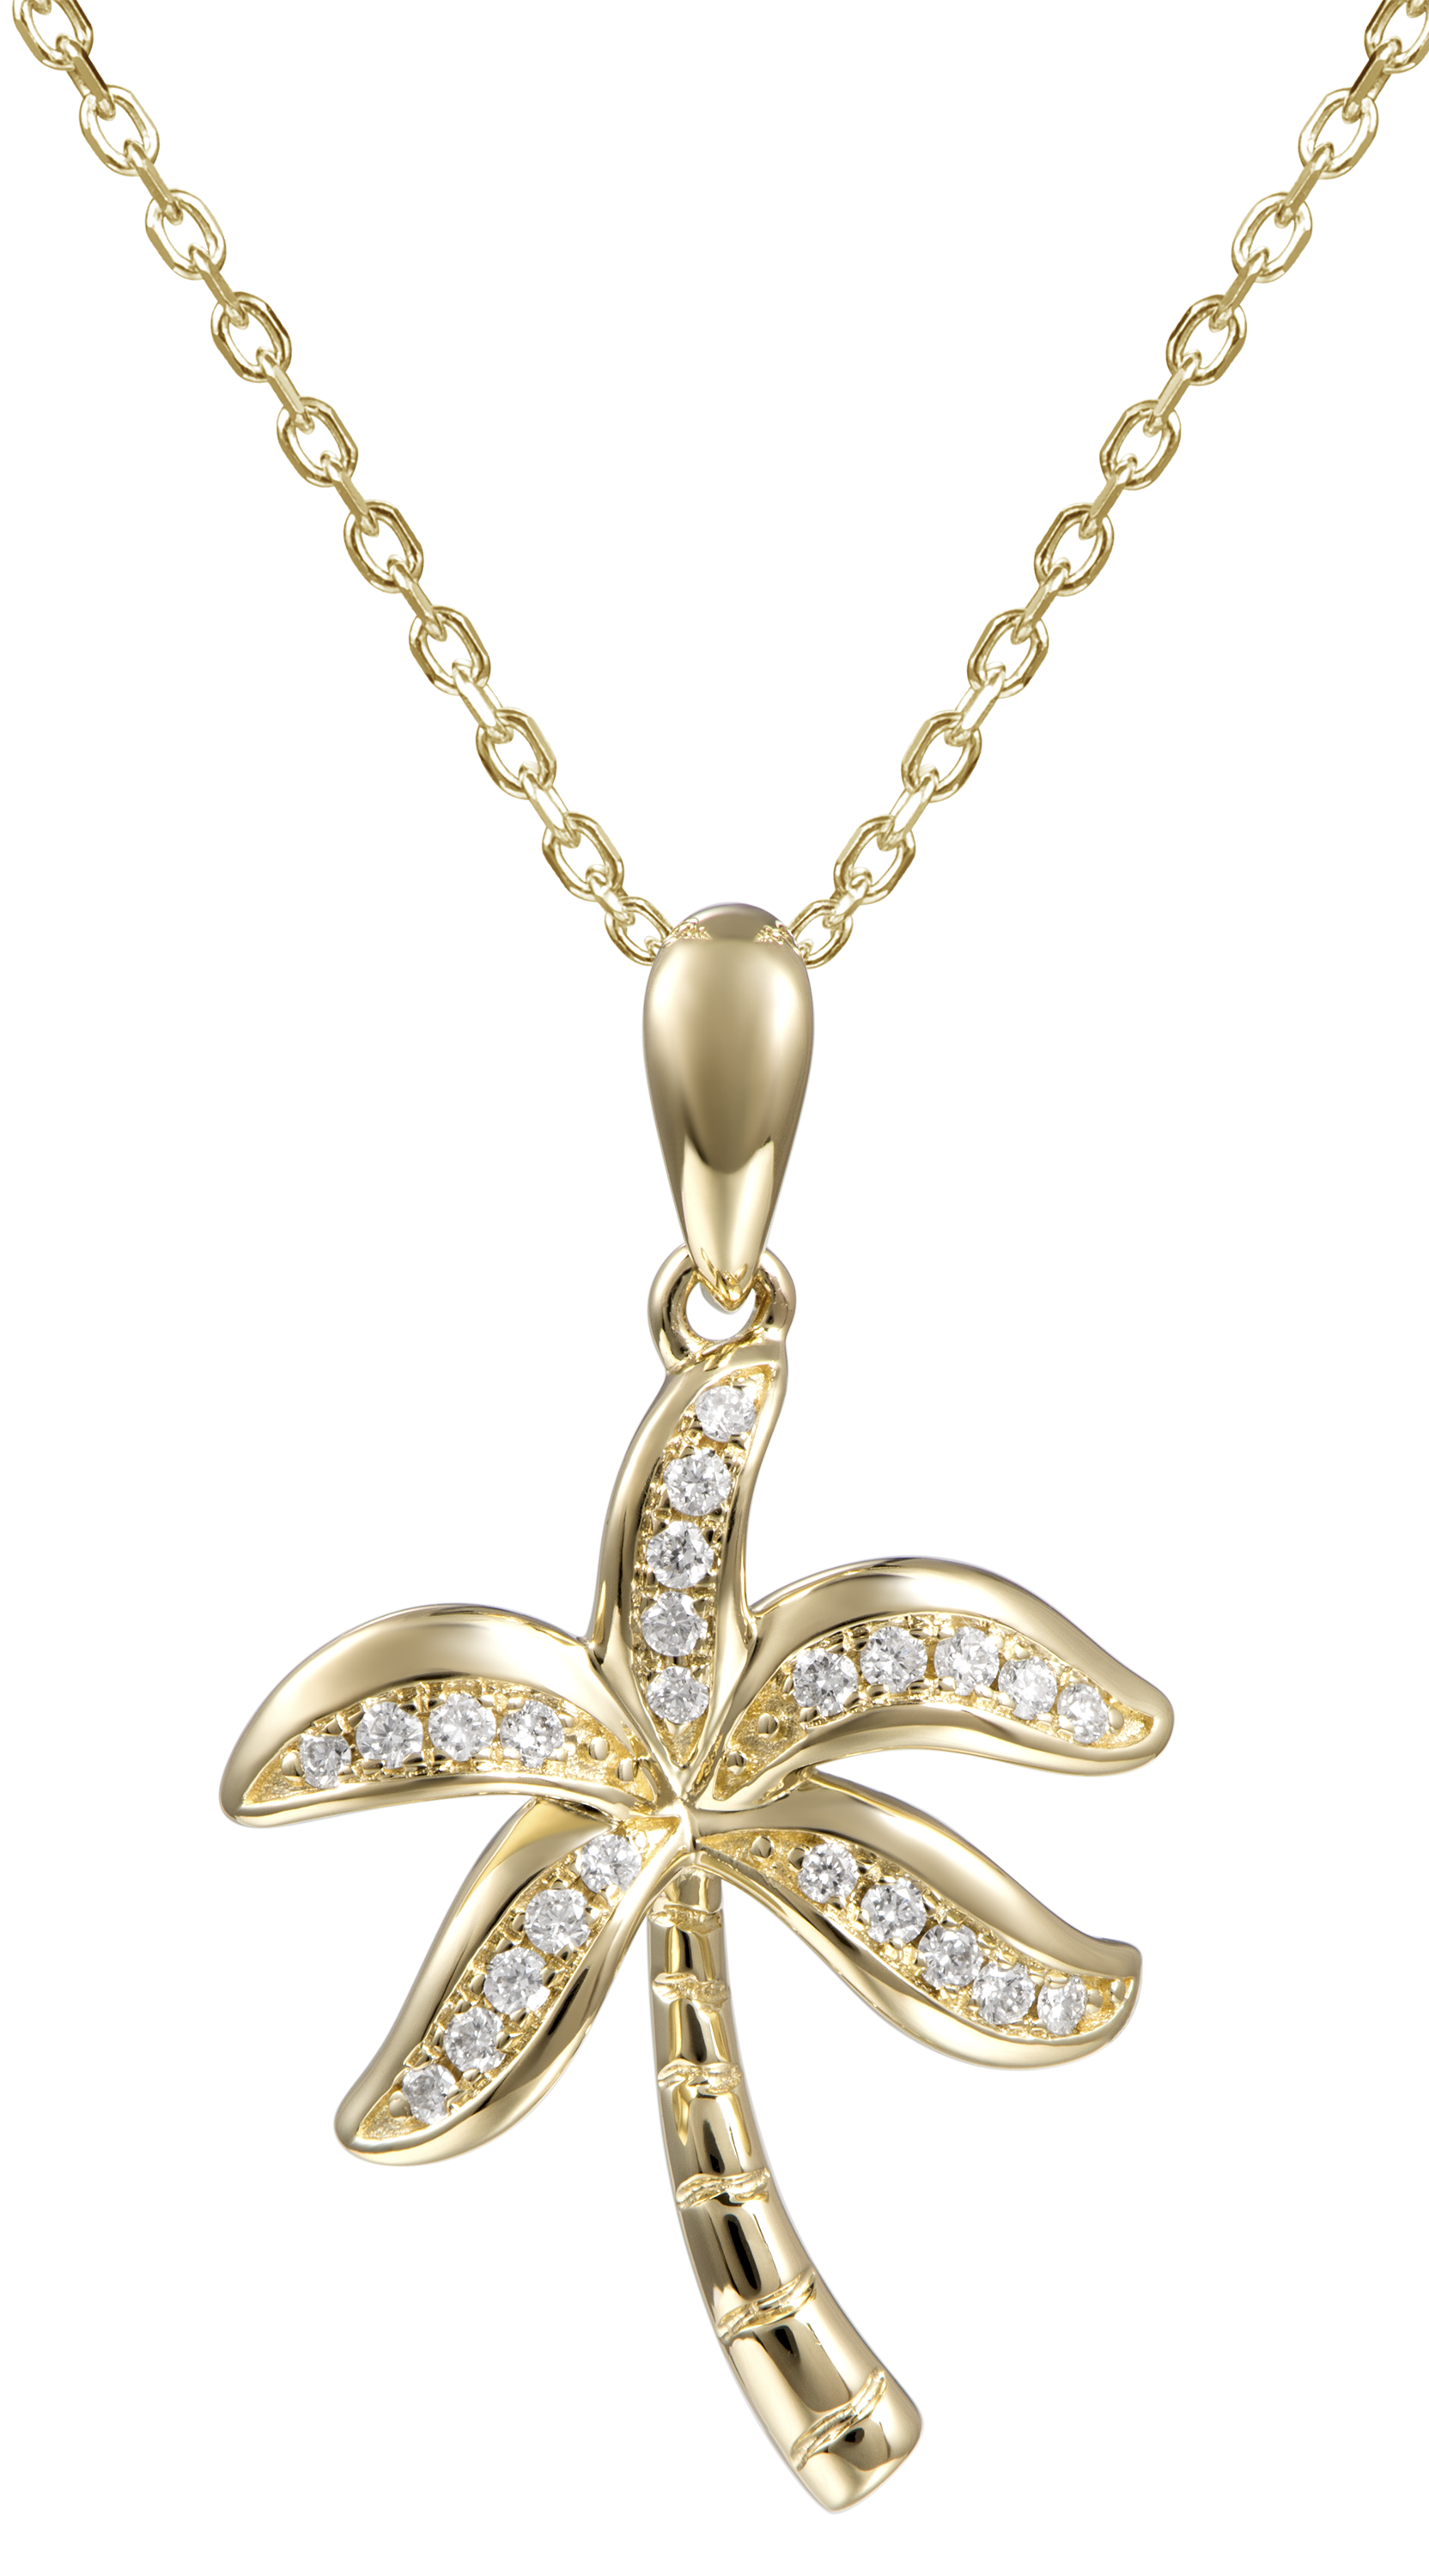 This palm tree pendant is set in14k yellow gold, features a secure bail and dazzles with 0.12 cts round diamonds. 24.00 mm (including bail). Add 1.1 mm optional chain for $199.00.